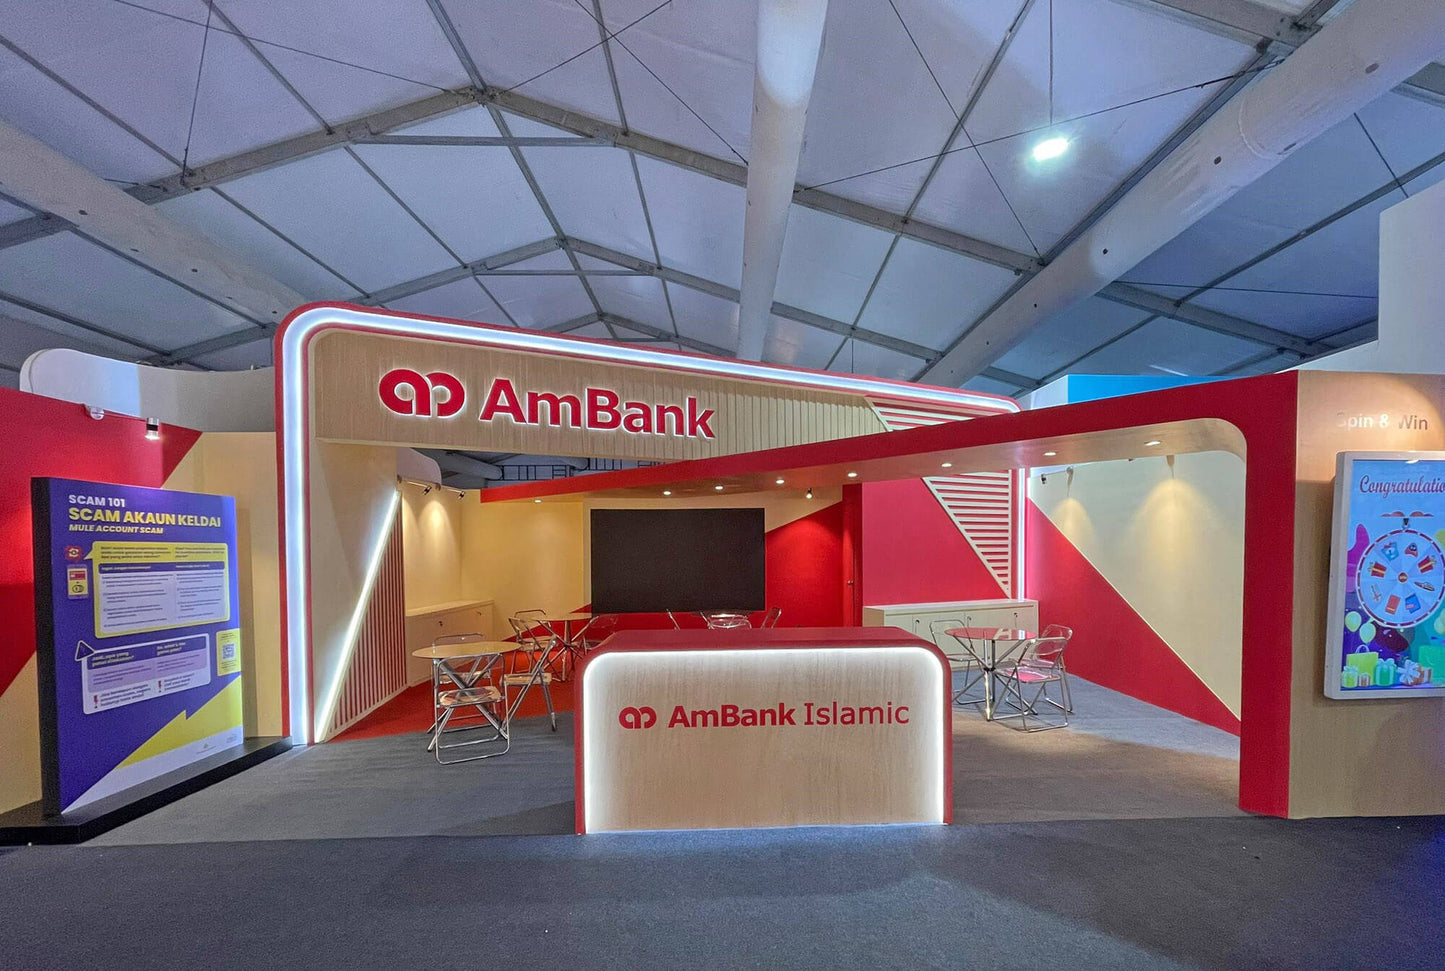 Exhibition Booth for AmBank